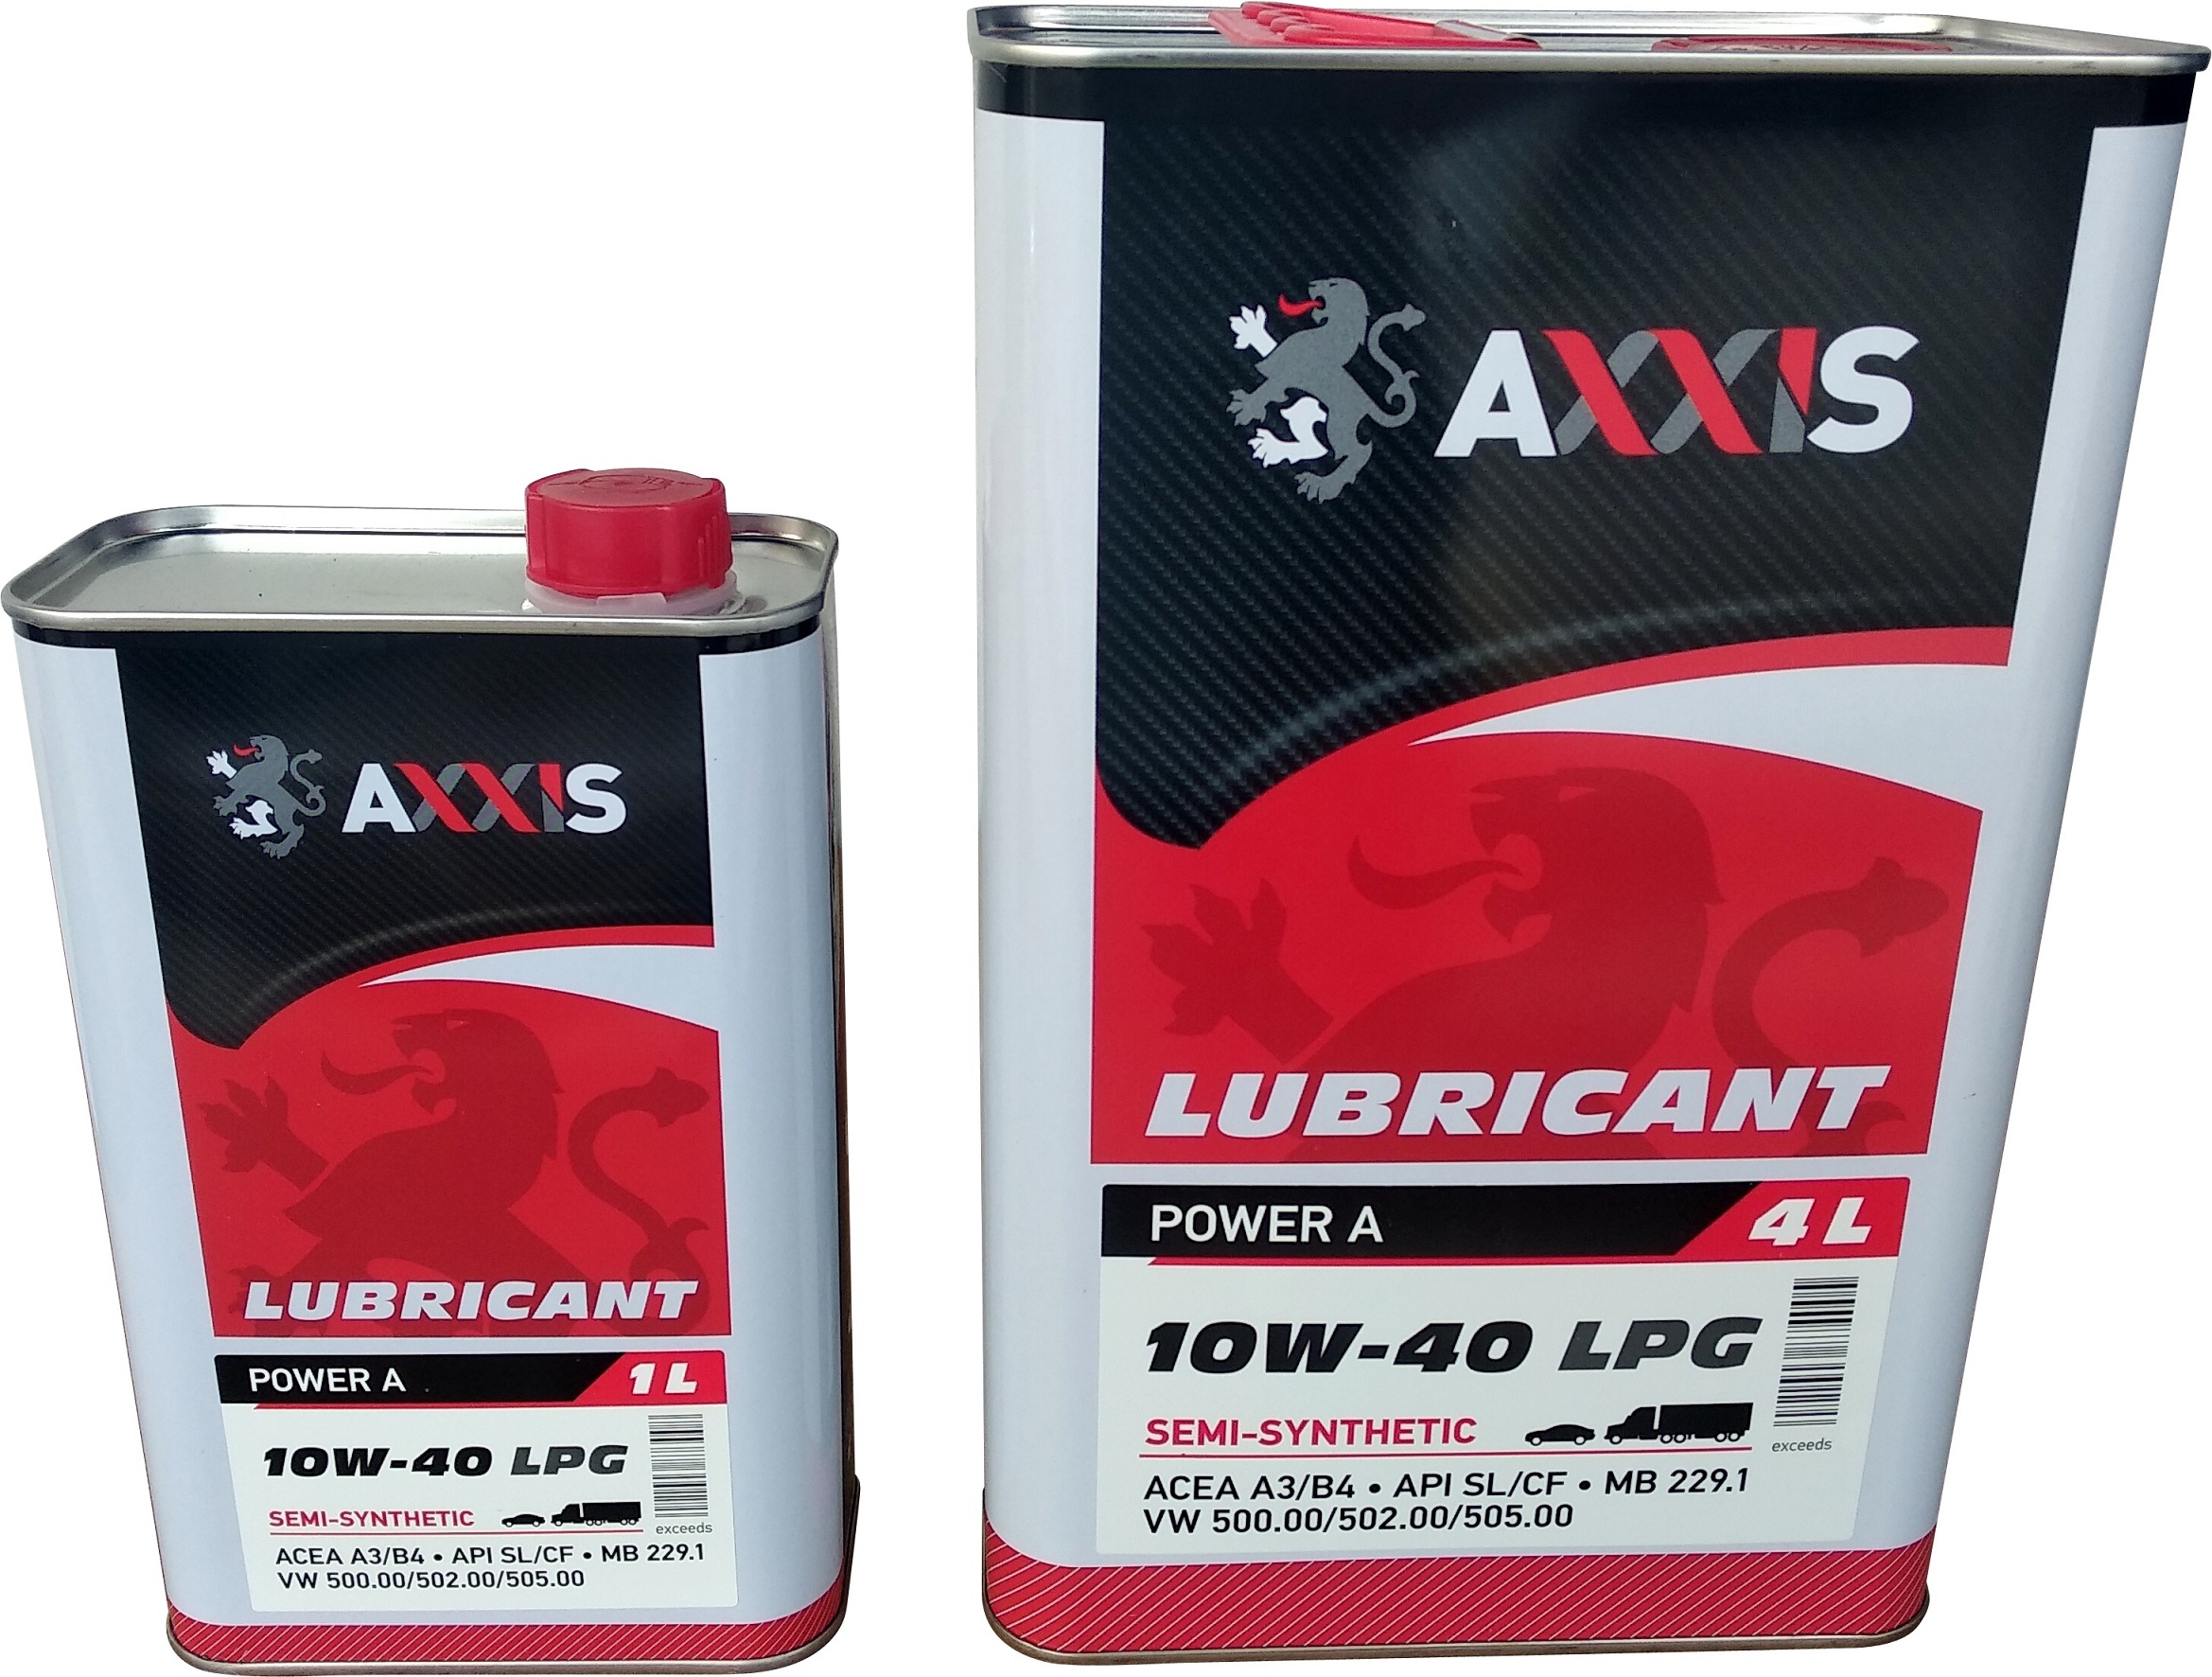 AXXIS 48021143275 Engine oil AXXIS 10W-40 LPG Power A, 4L + 1L 48021143275